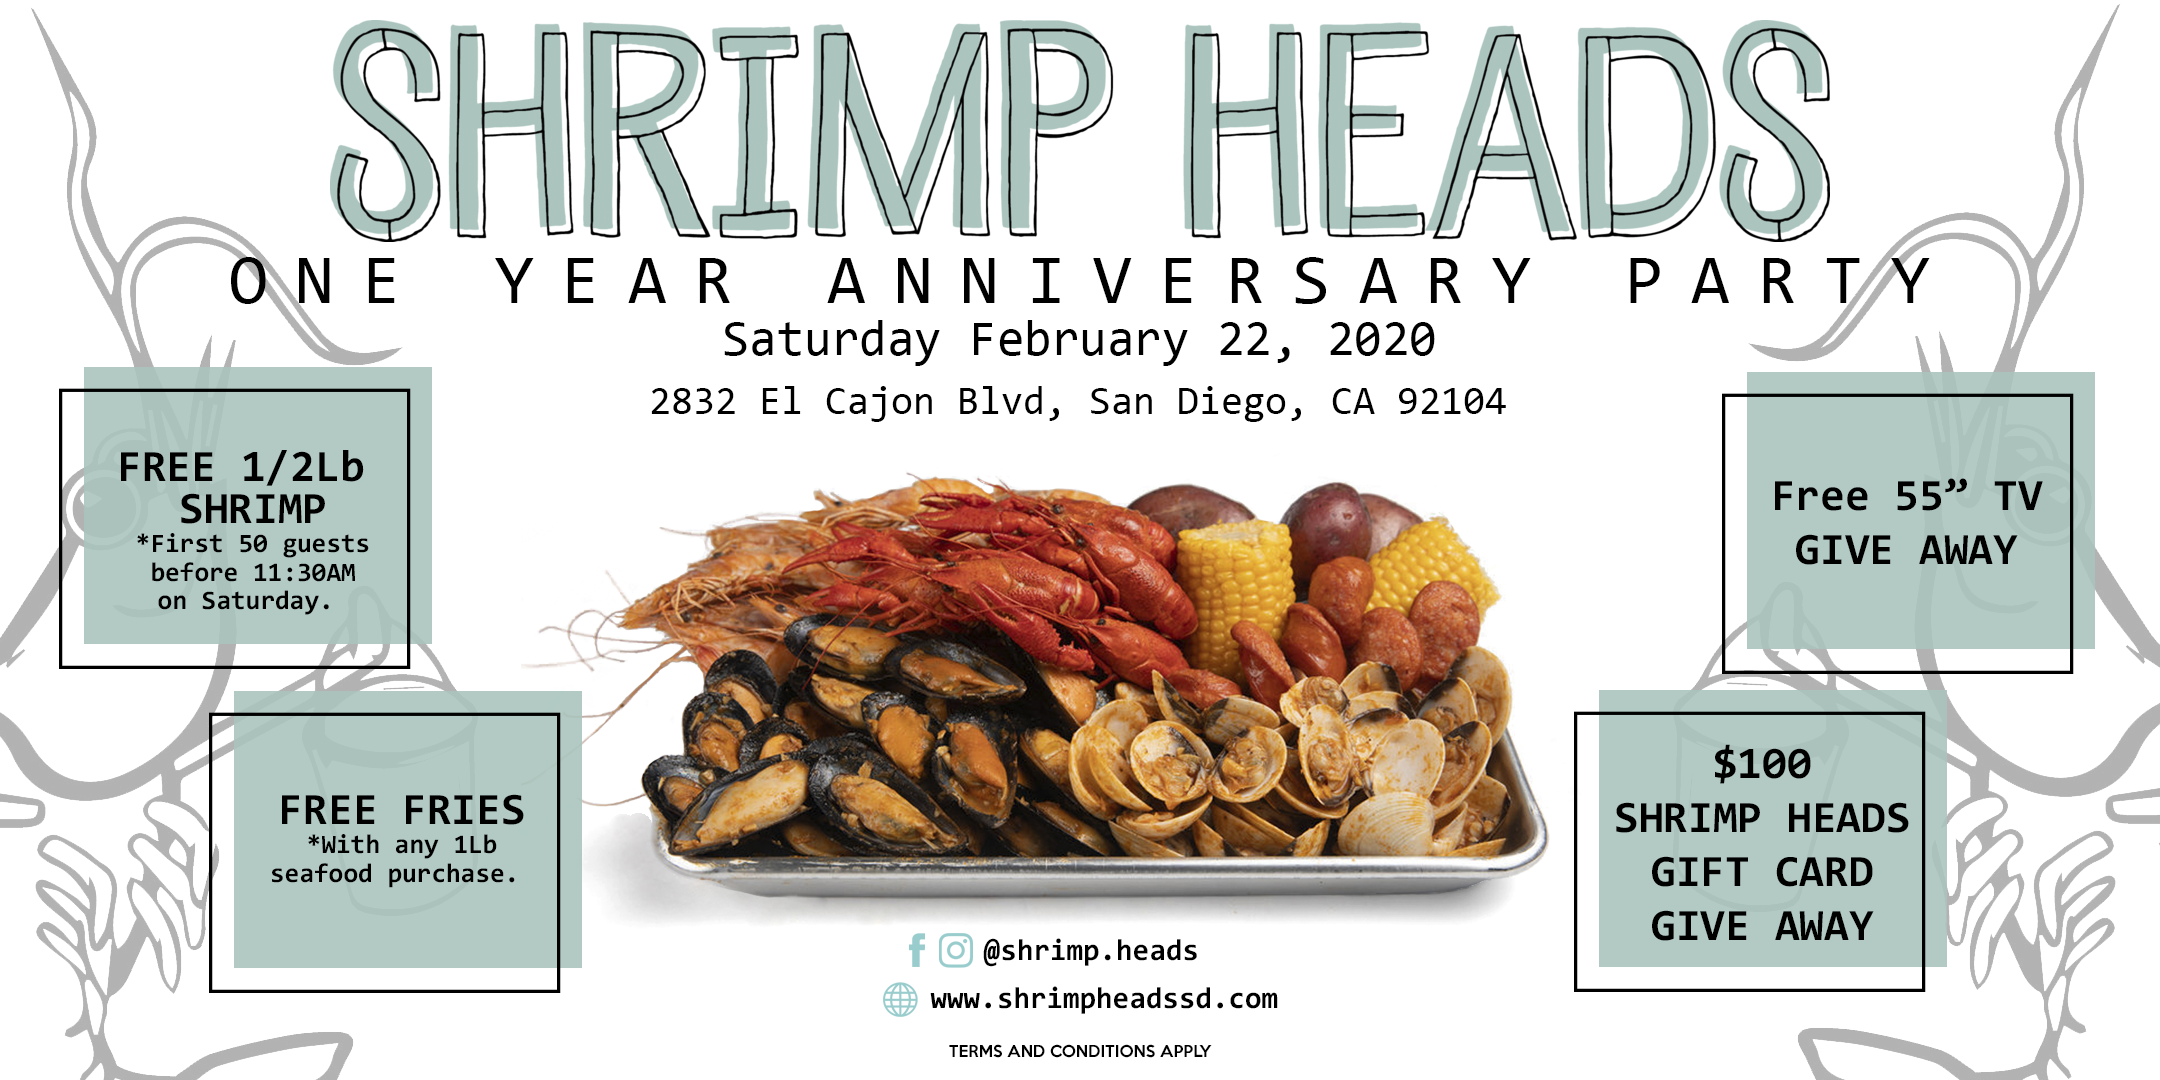 SHRIMP HEADS San Diego 1 YEAR ANNIVERSARY PARTY! FREE SHRIMP, FREE TV+MORE